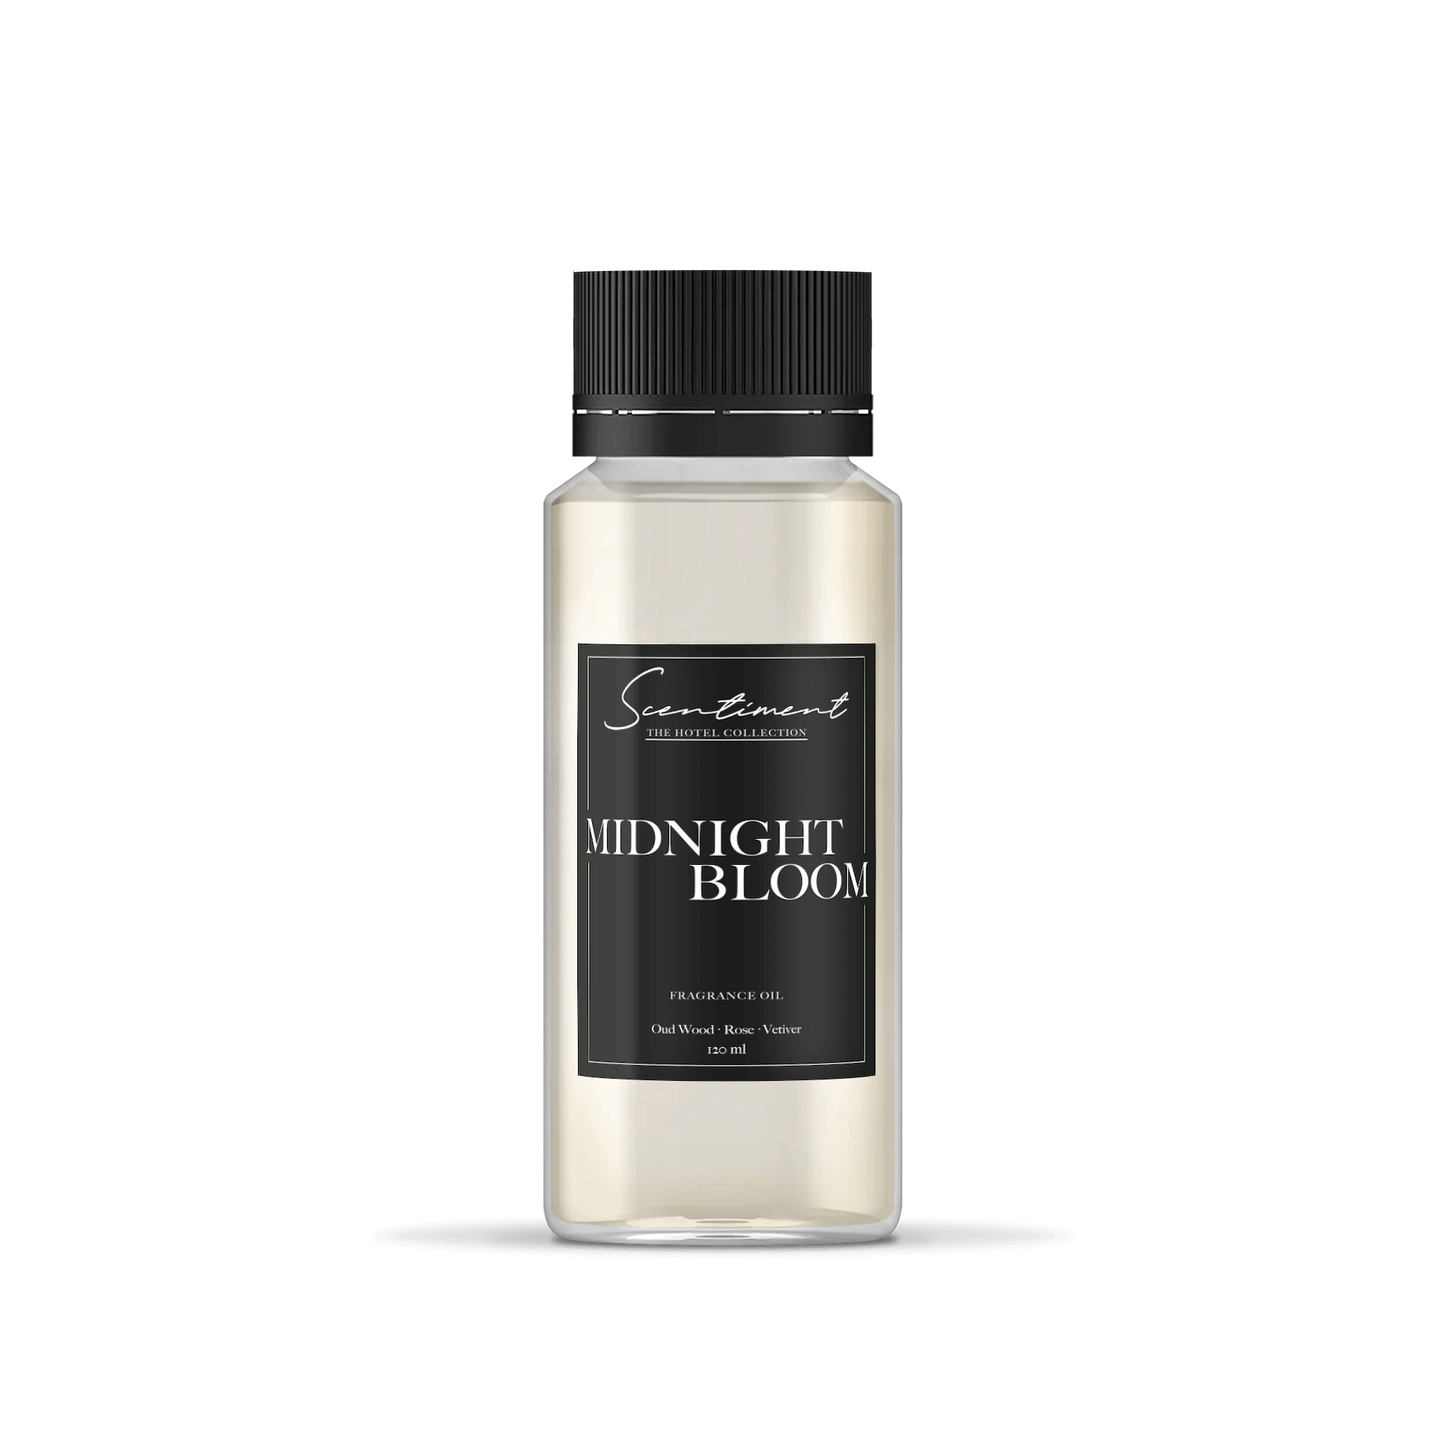 Midnight Bloom Fragrance Oil, inspired by Fairmont Hotels & Resort®, with notes of Oud Wood, Rose, and Vetiver.